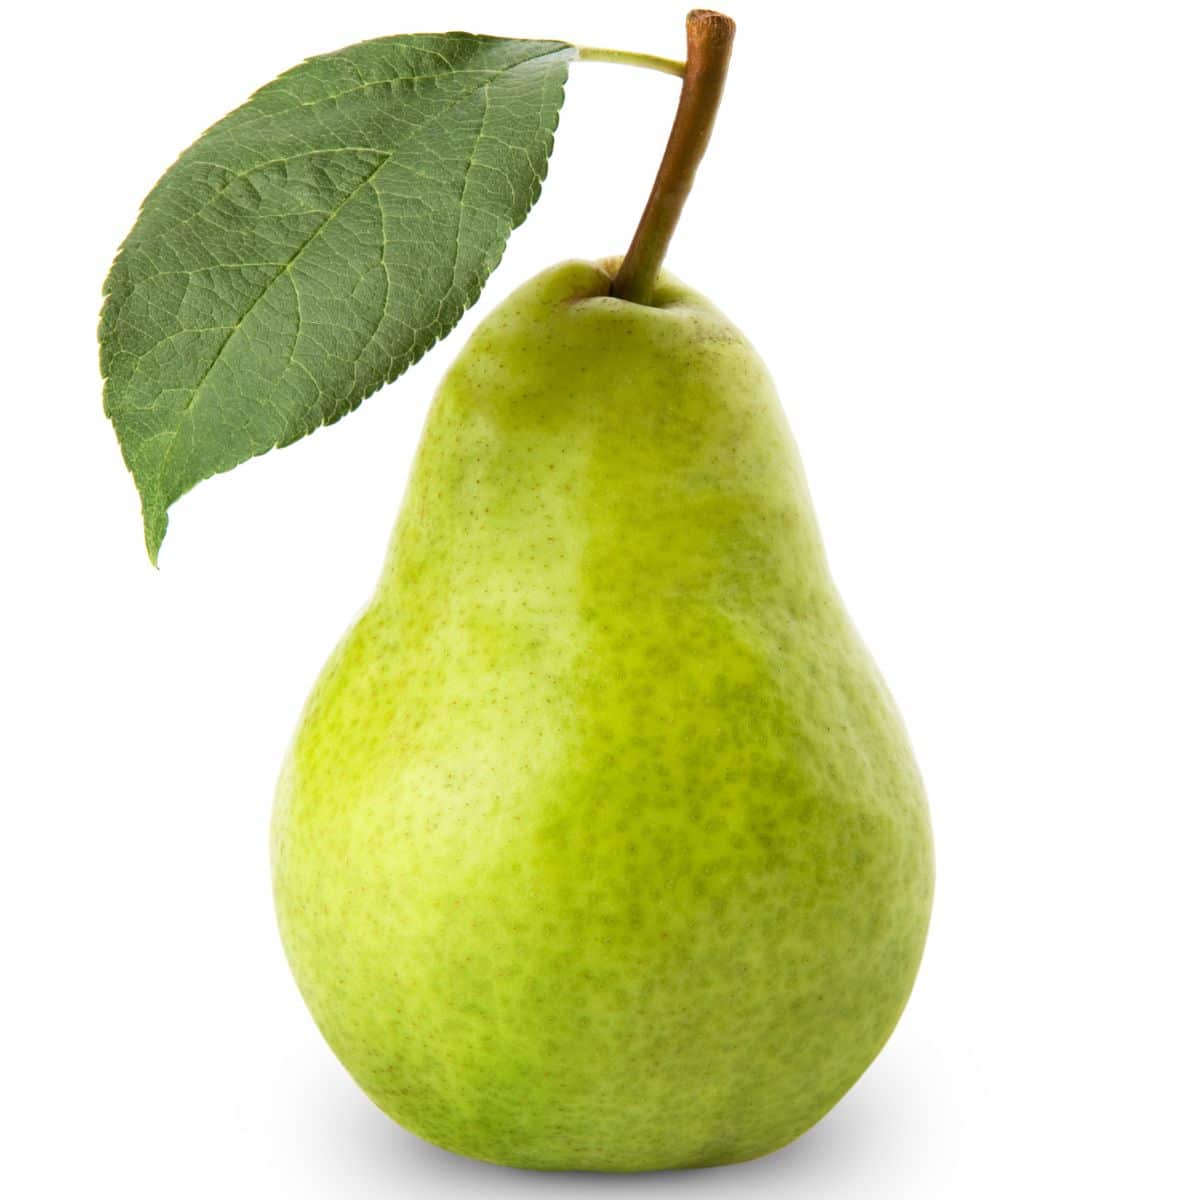 Tosca pear on a white background.